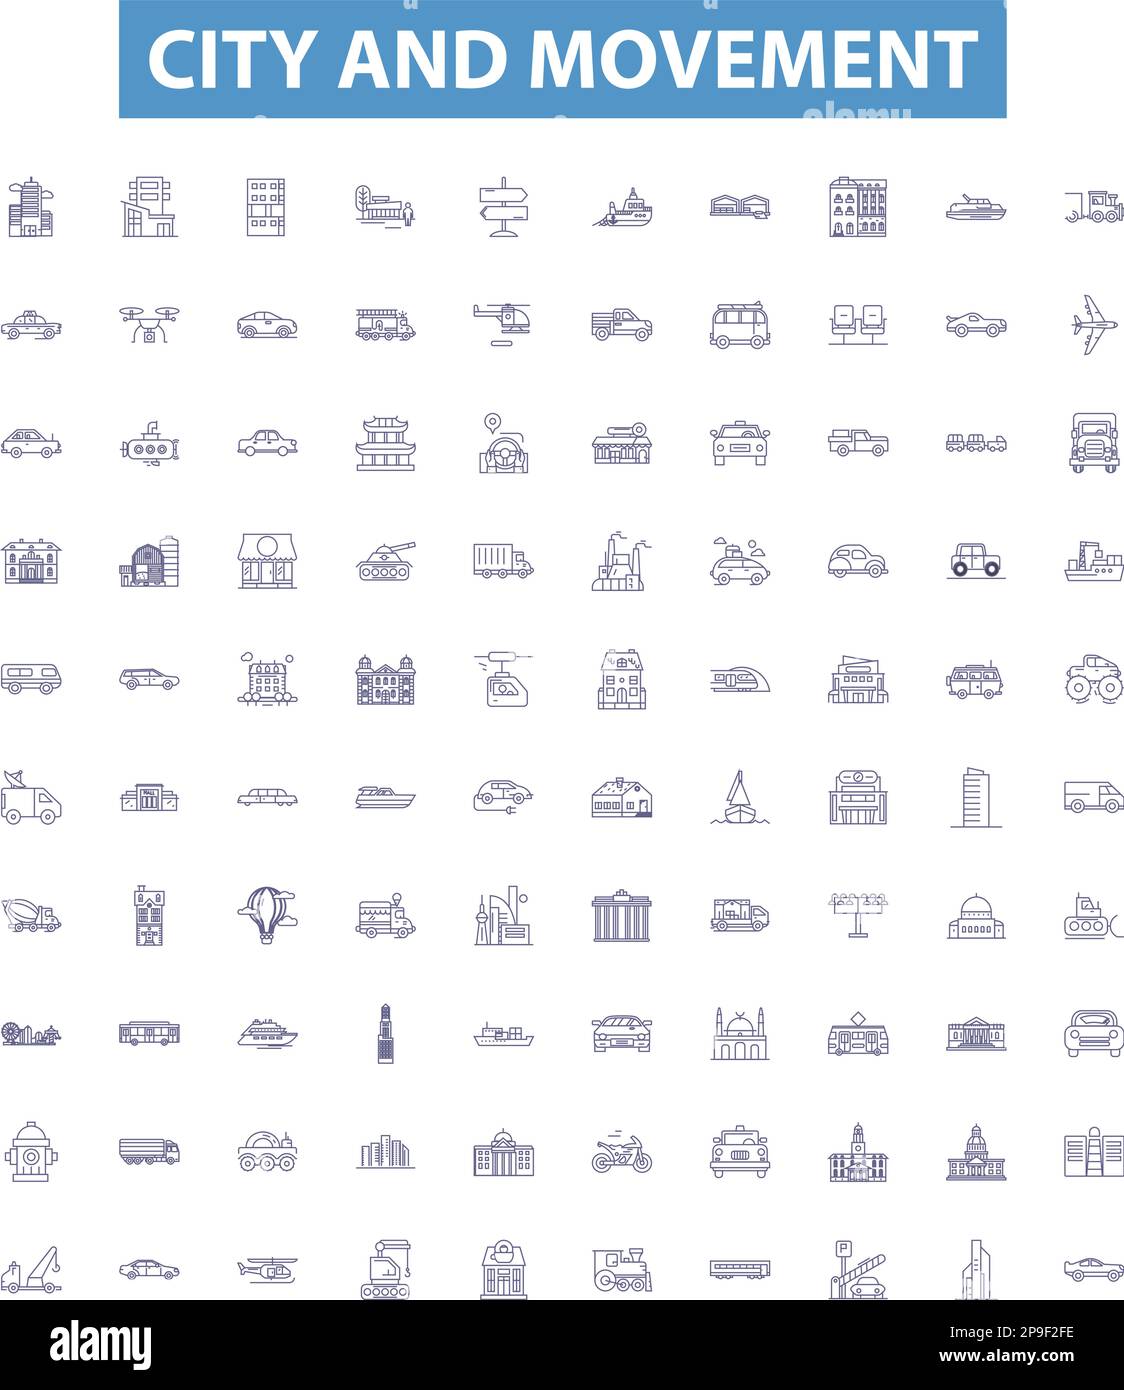 City and movement line icons, signs set. city, movement, transportation, urban, pedestrian, bike, car, bus, train outline vector illustrations. Stock Vector